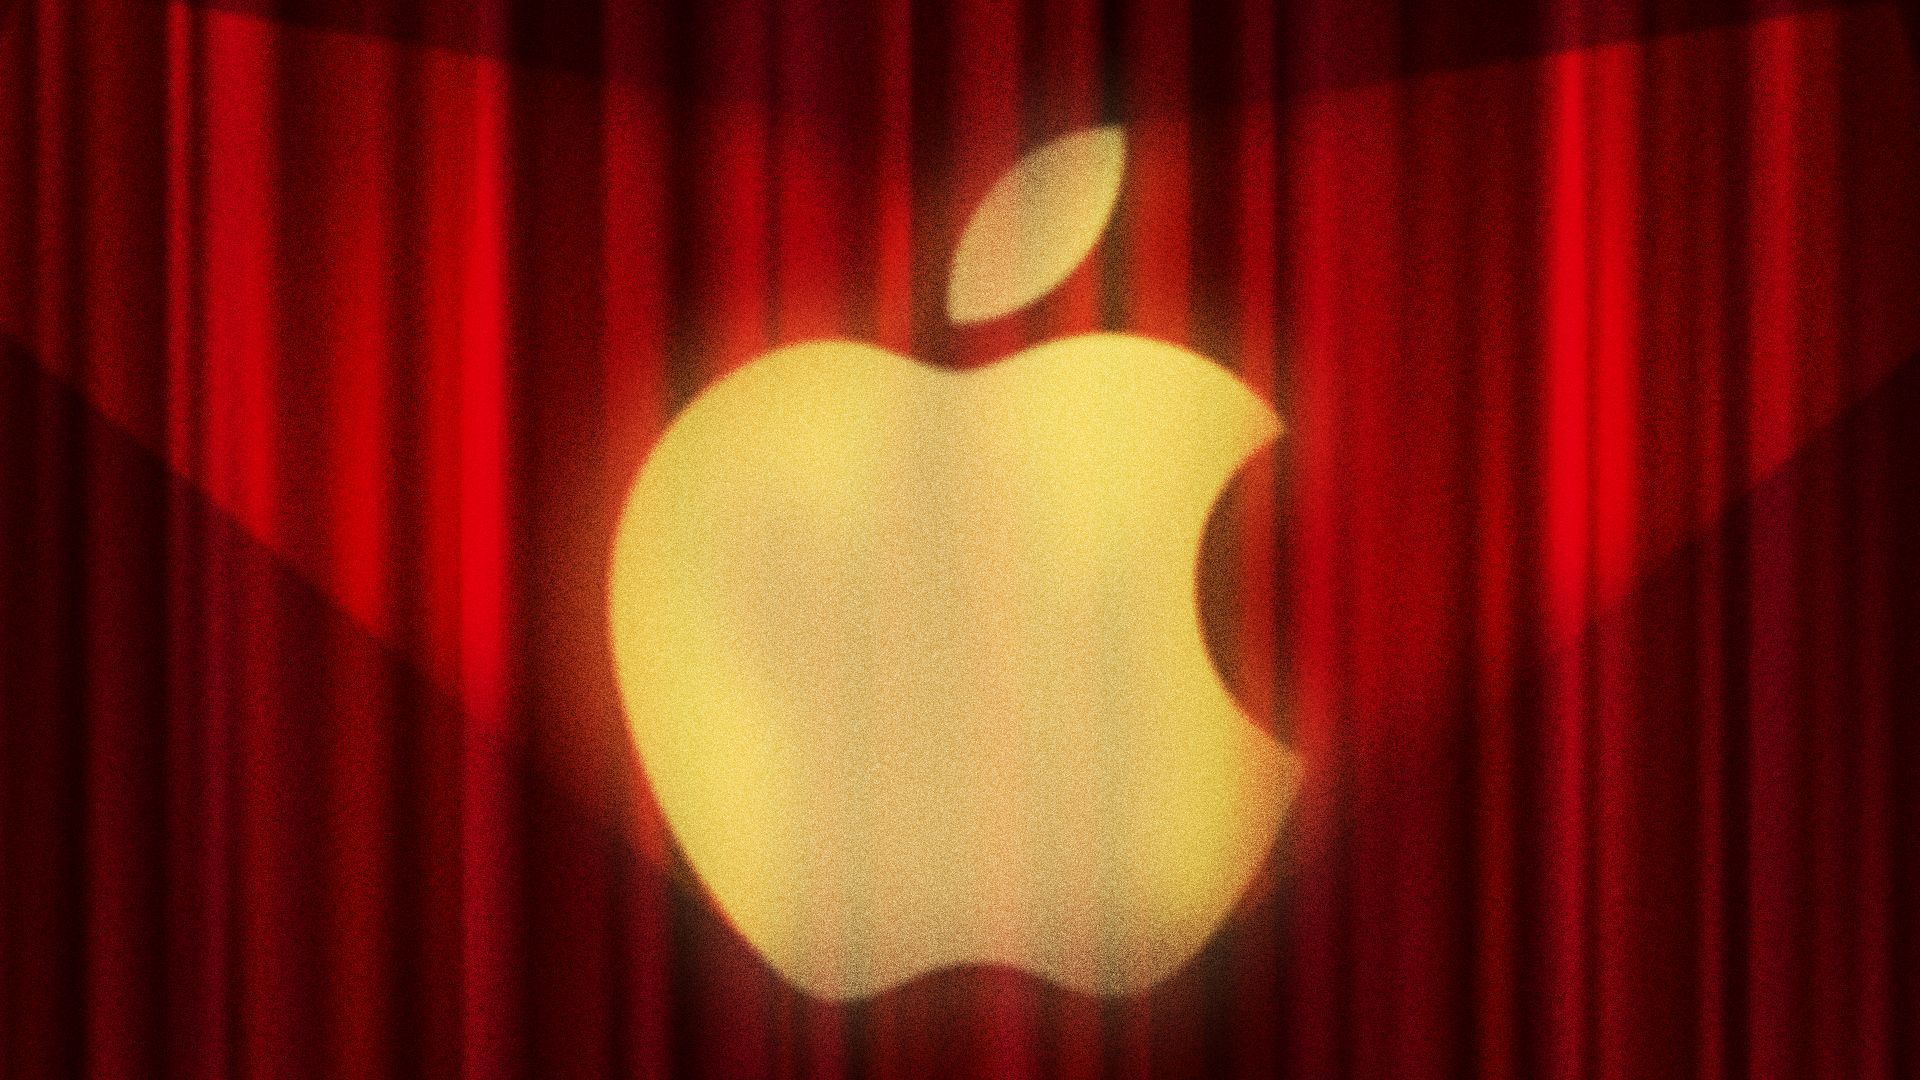 Illustration of the Apple logo projected onto a curtained stage.